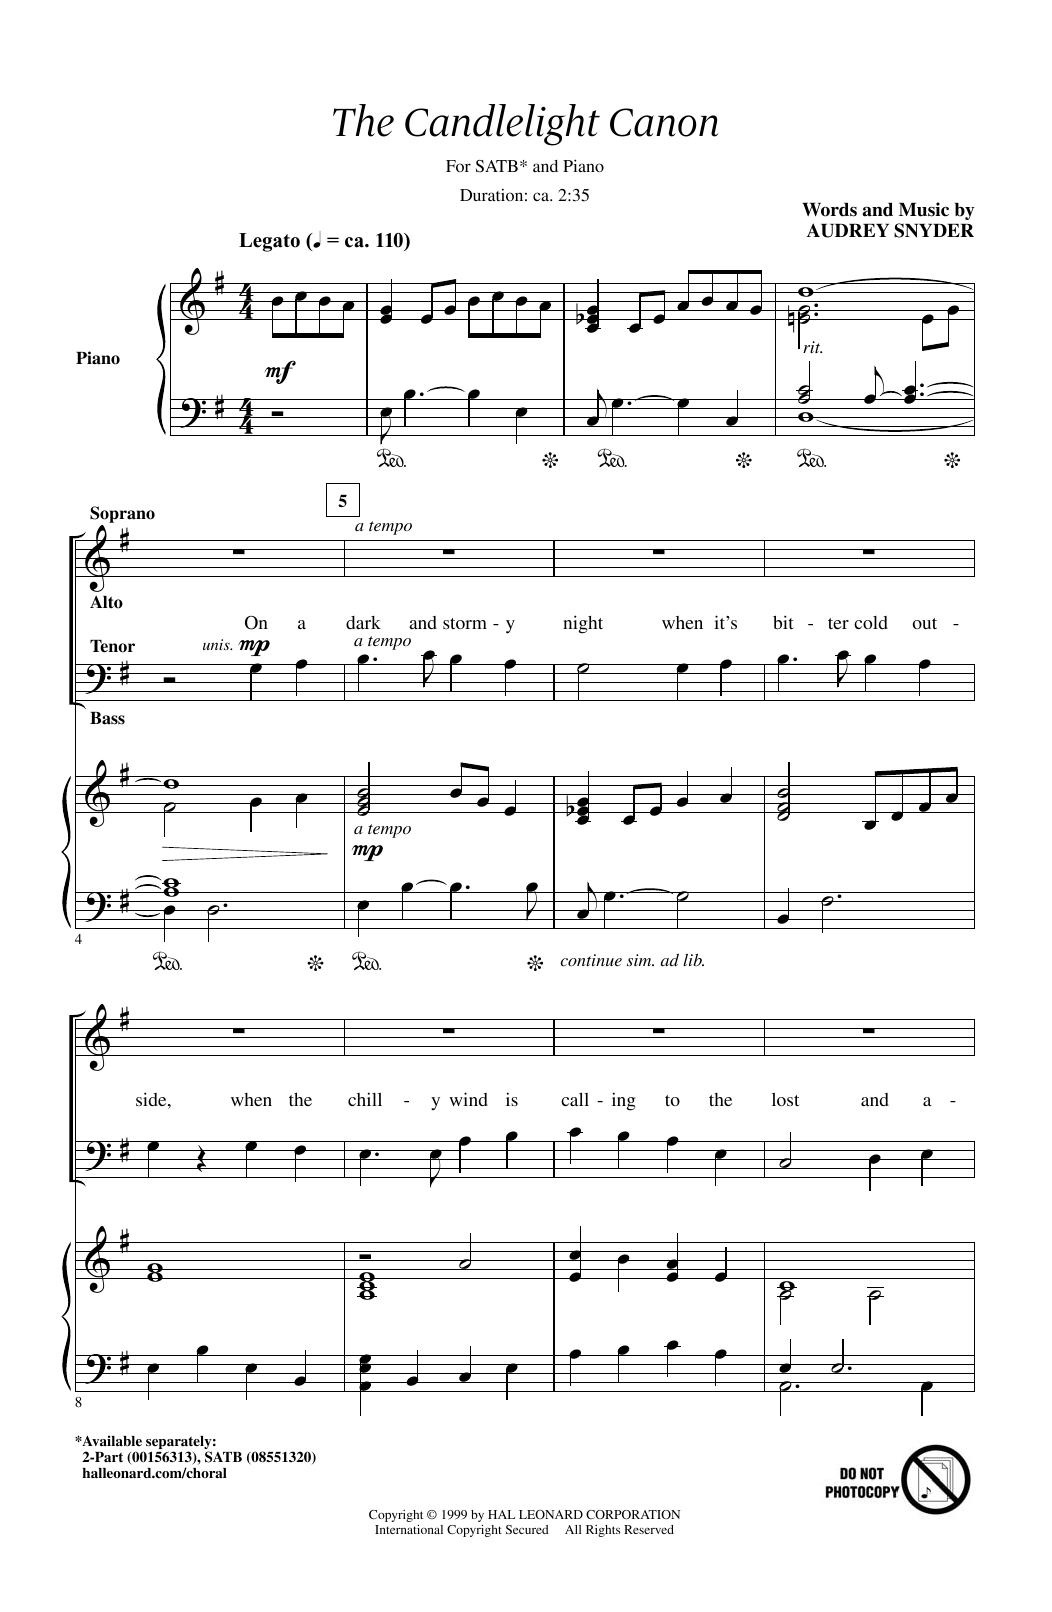 Download Audrey Snyder The Candlelight Canon Sheet Music